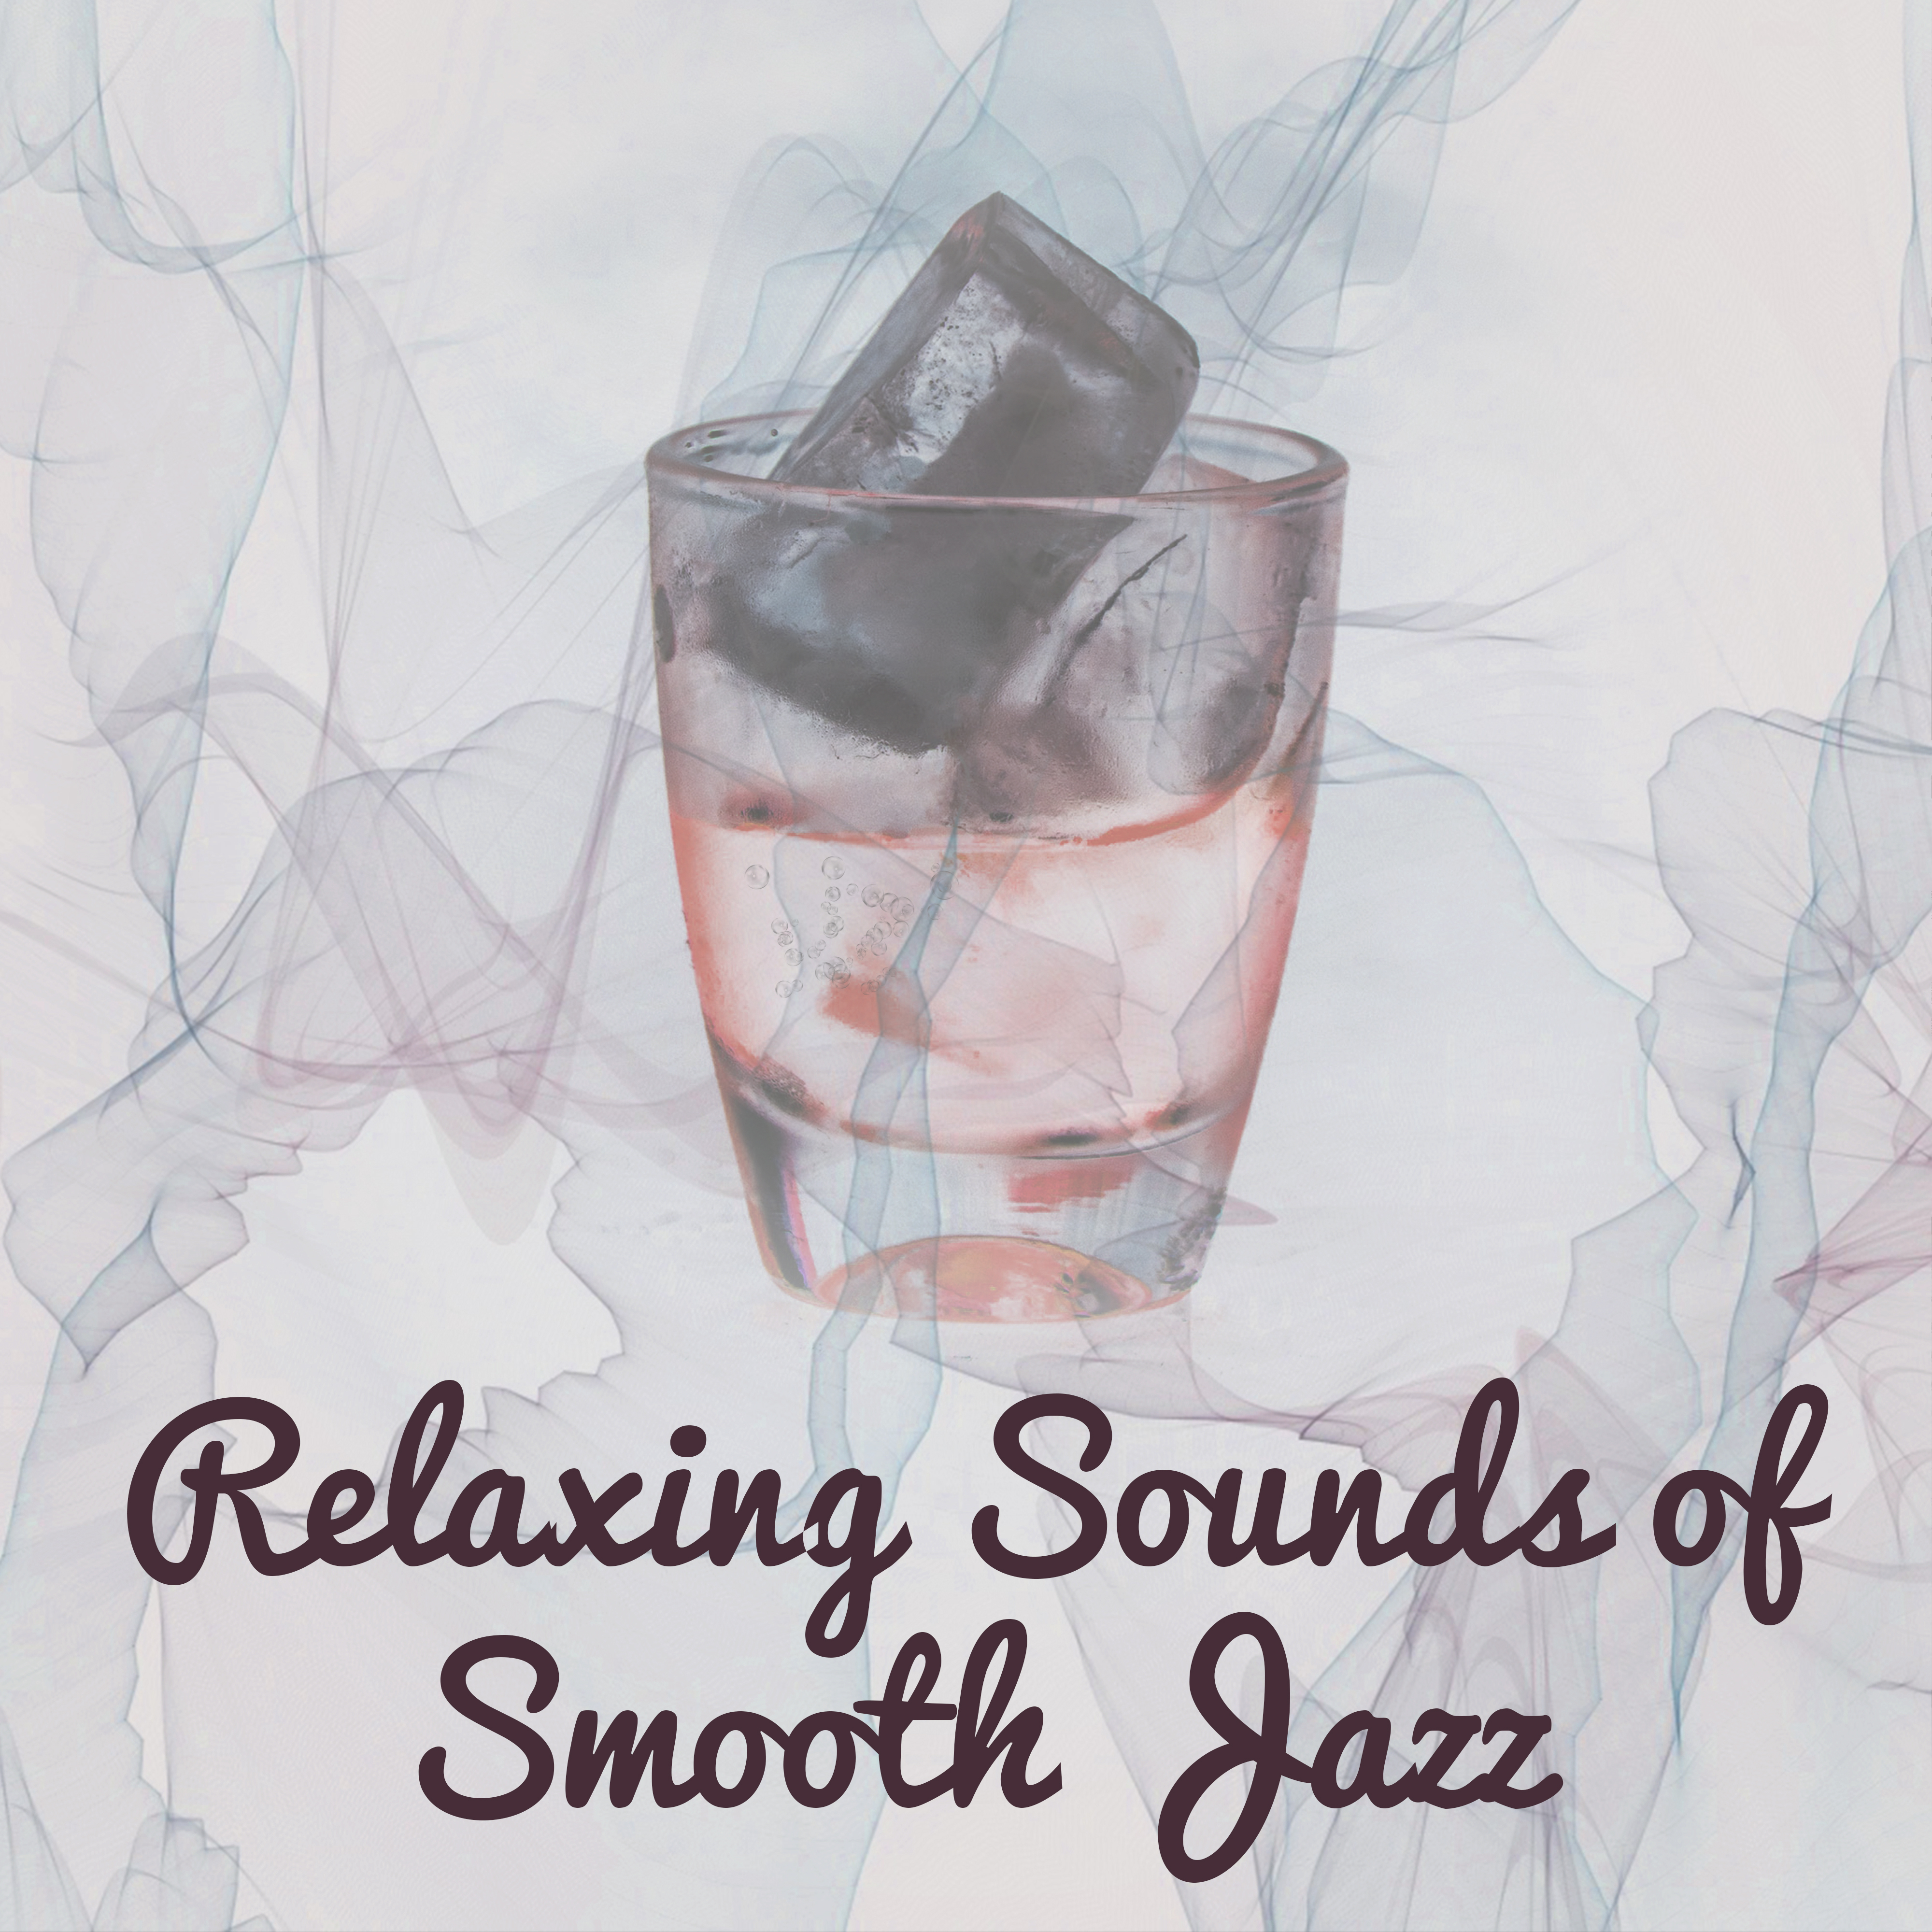 Relaxing Sounds of Smooth Jazz – Calm Down & Listen, Peaceful Music to Relax, Jazz Sounds, Piano Rest